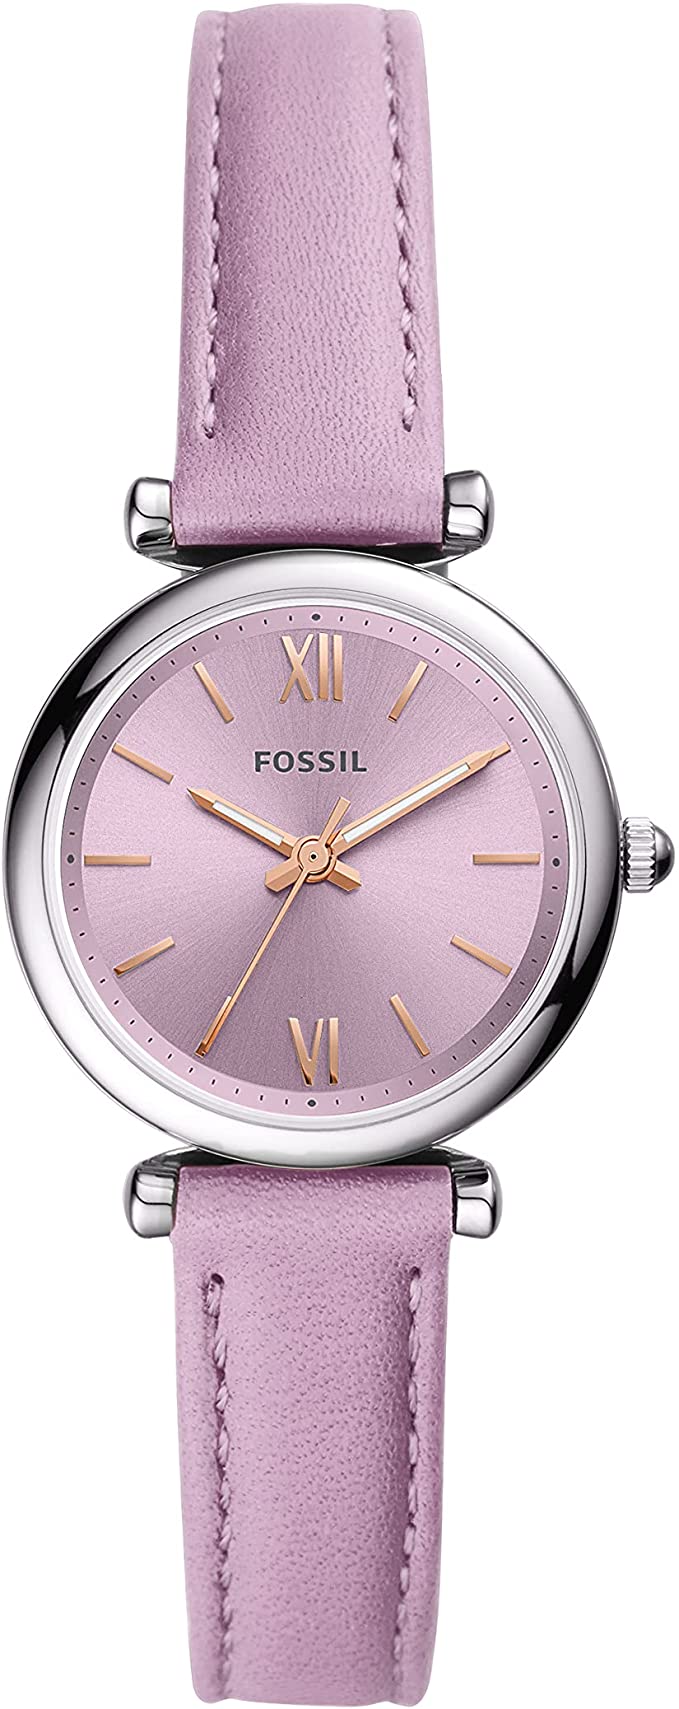 Fossil Women's Carlie Mini Stainless Steel and Leather Quartz Watch ...